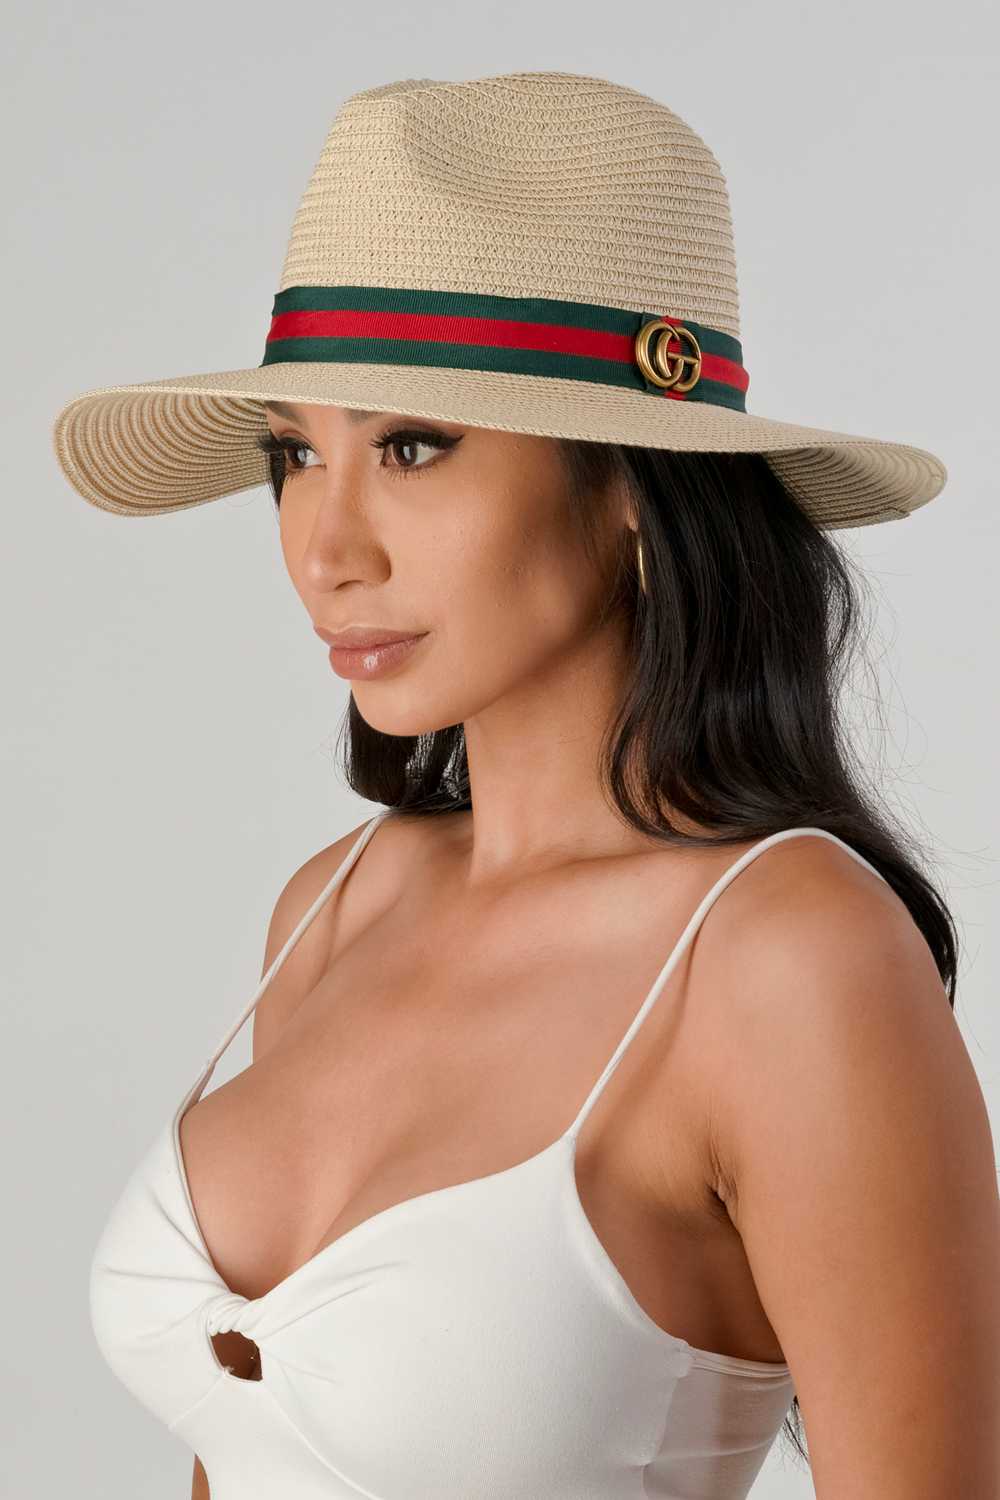 GO Decorated Green and Red Band Straw Fedora Hat